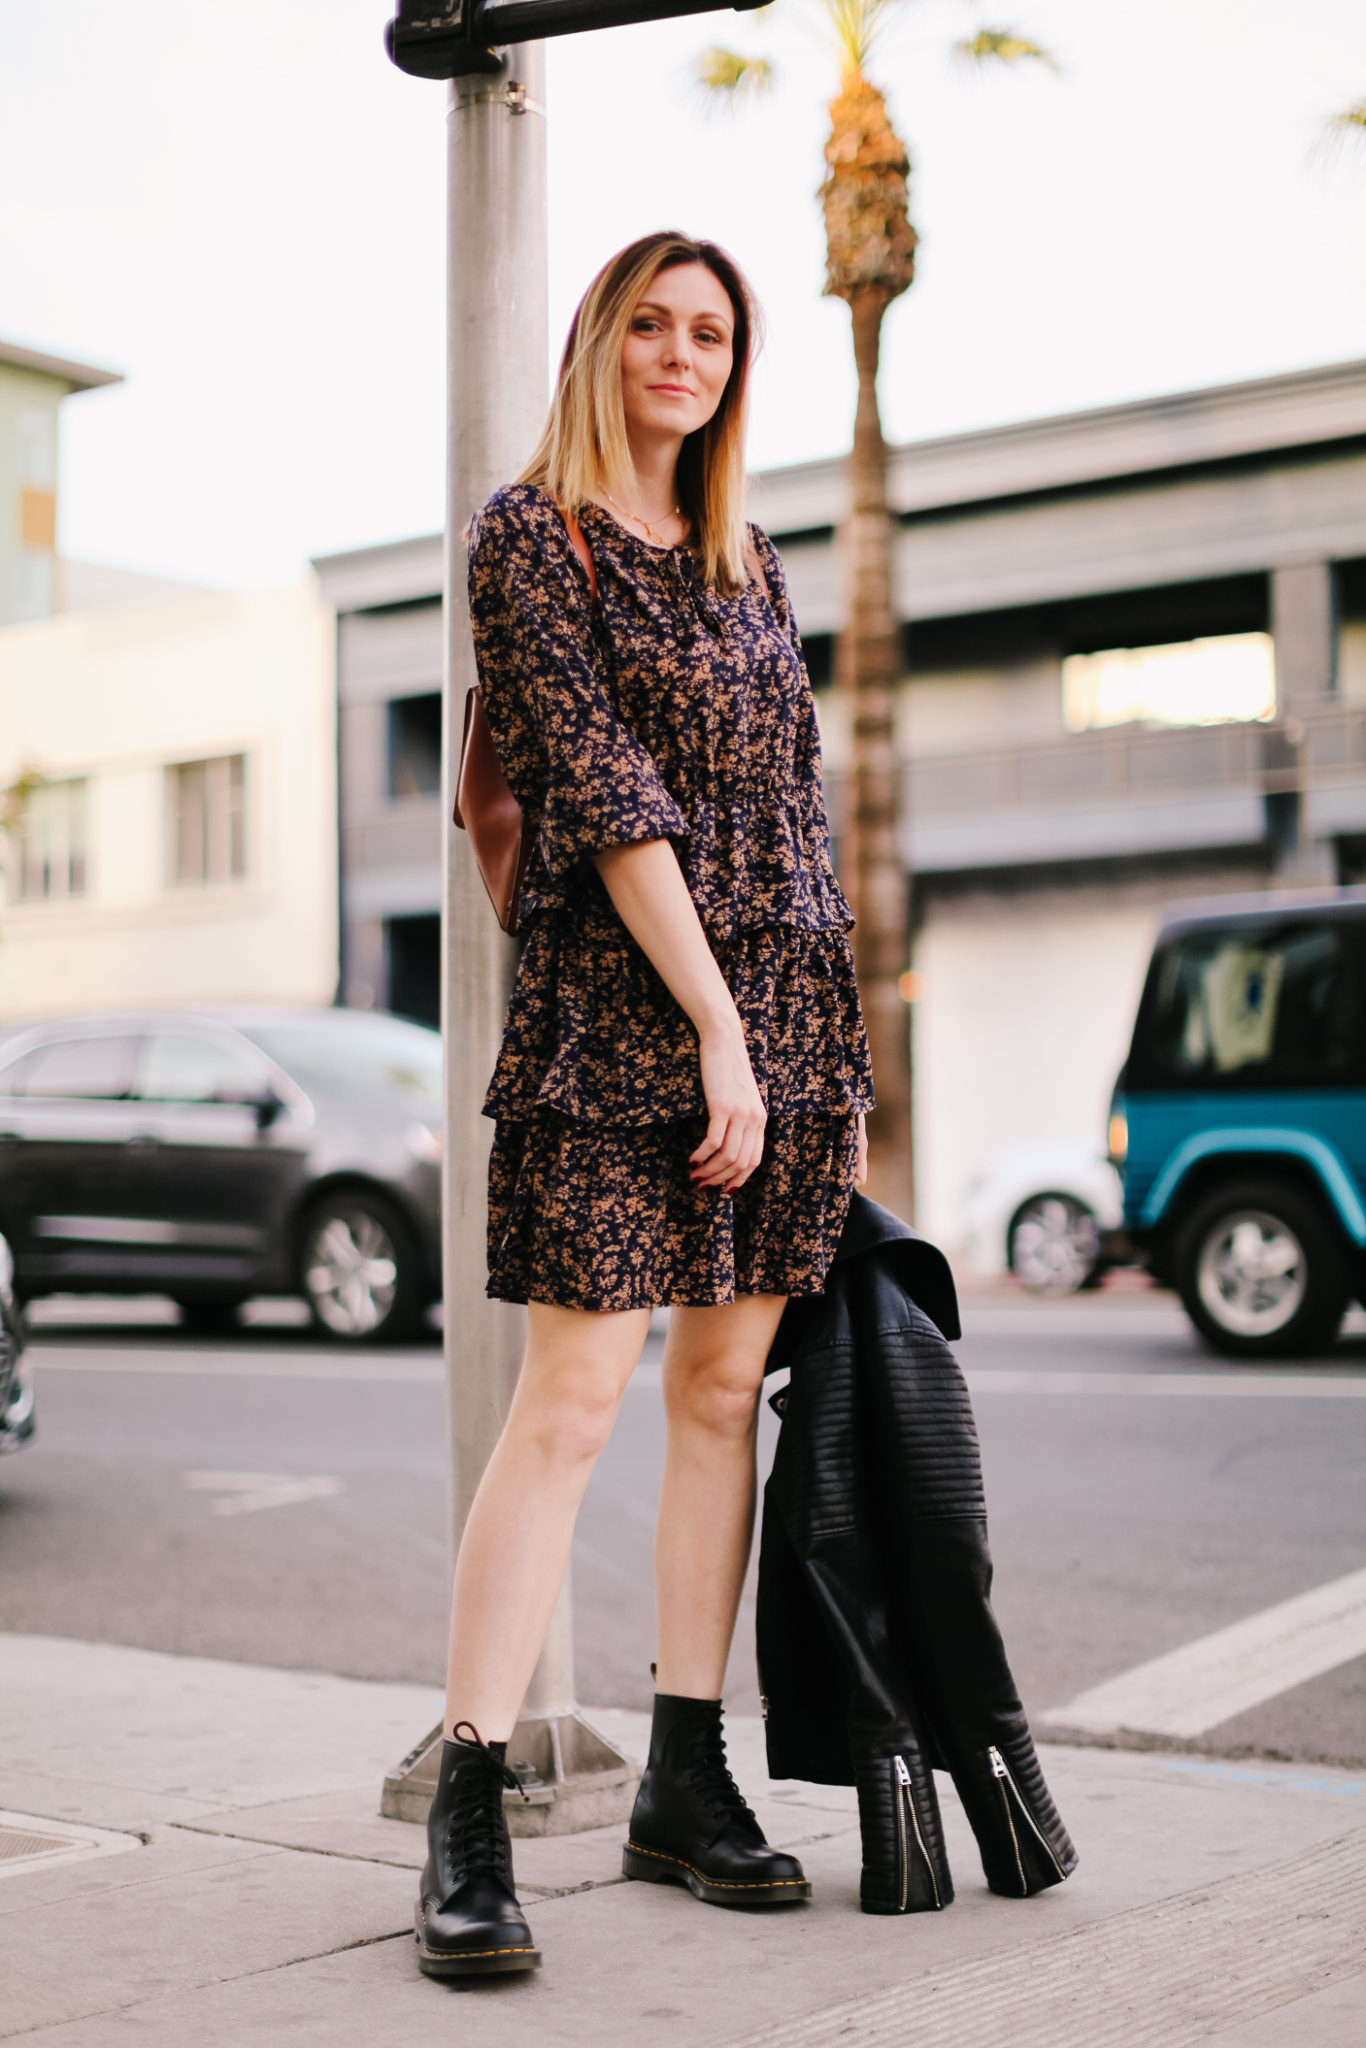 How to Wear a Floral Ruffle Dress for an Edgy Look